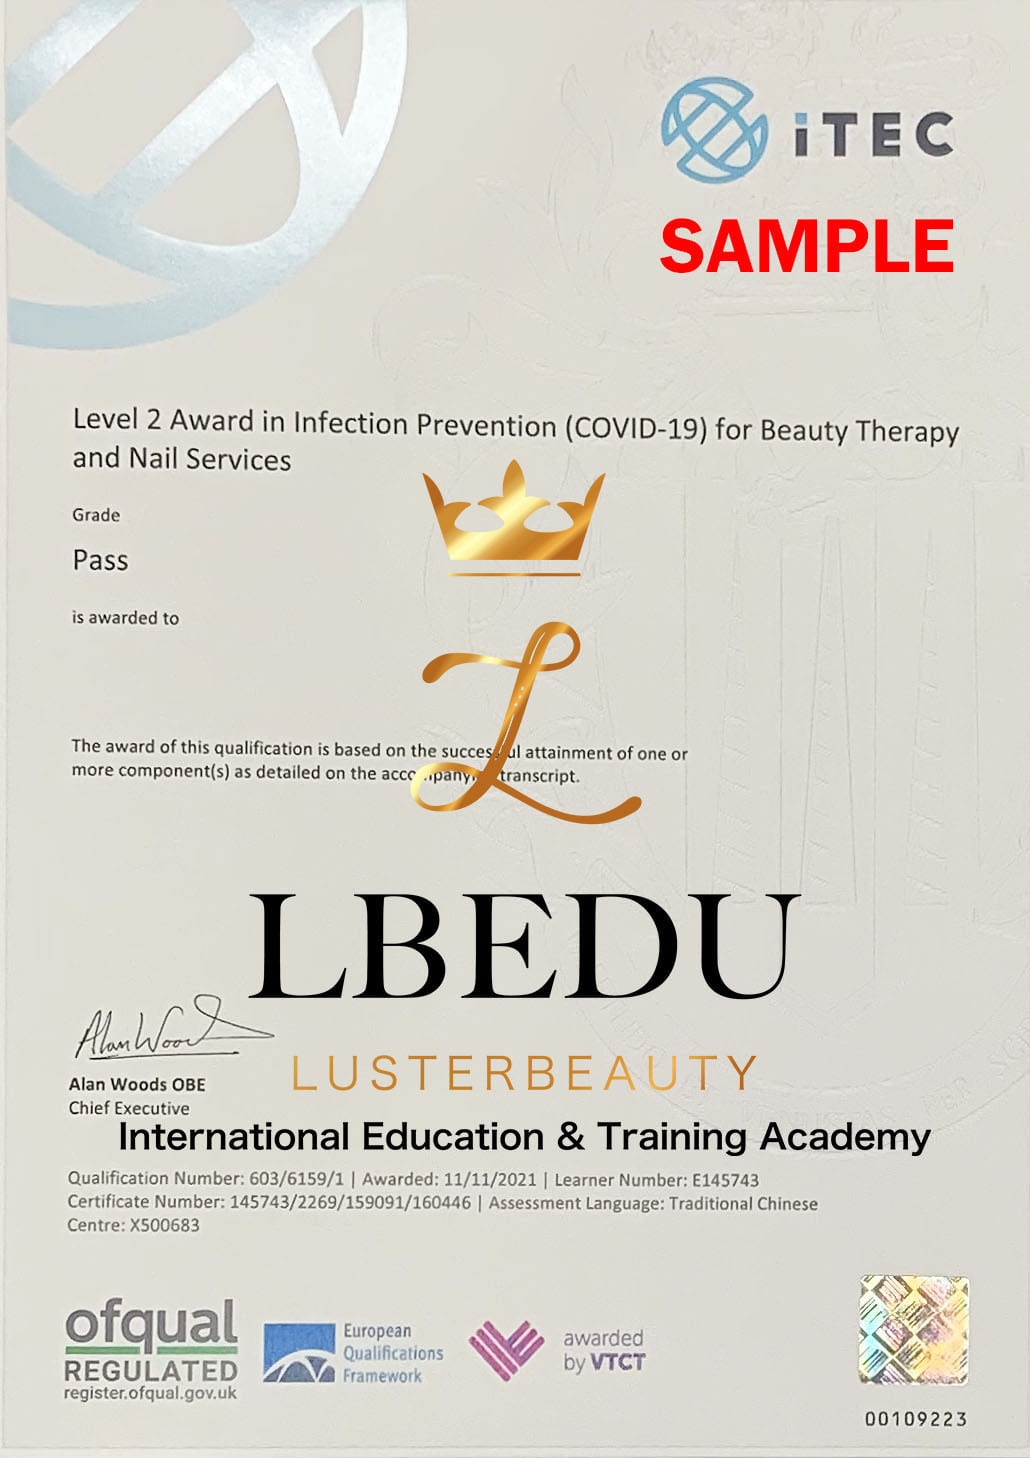 Luster Beauty LBEDU VTCT iTEC Level 2 Award in Infection Prevention (COVID-19) for Beauty Therapy and Nail Services sample certificate